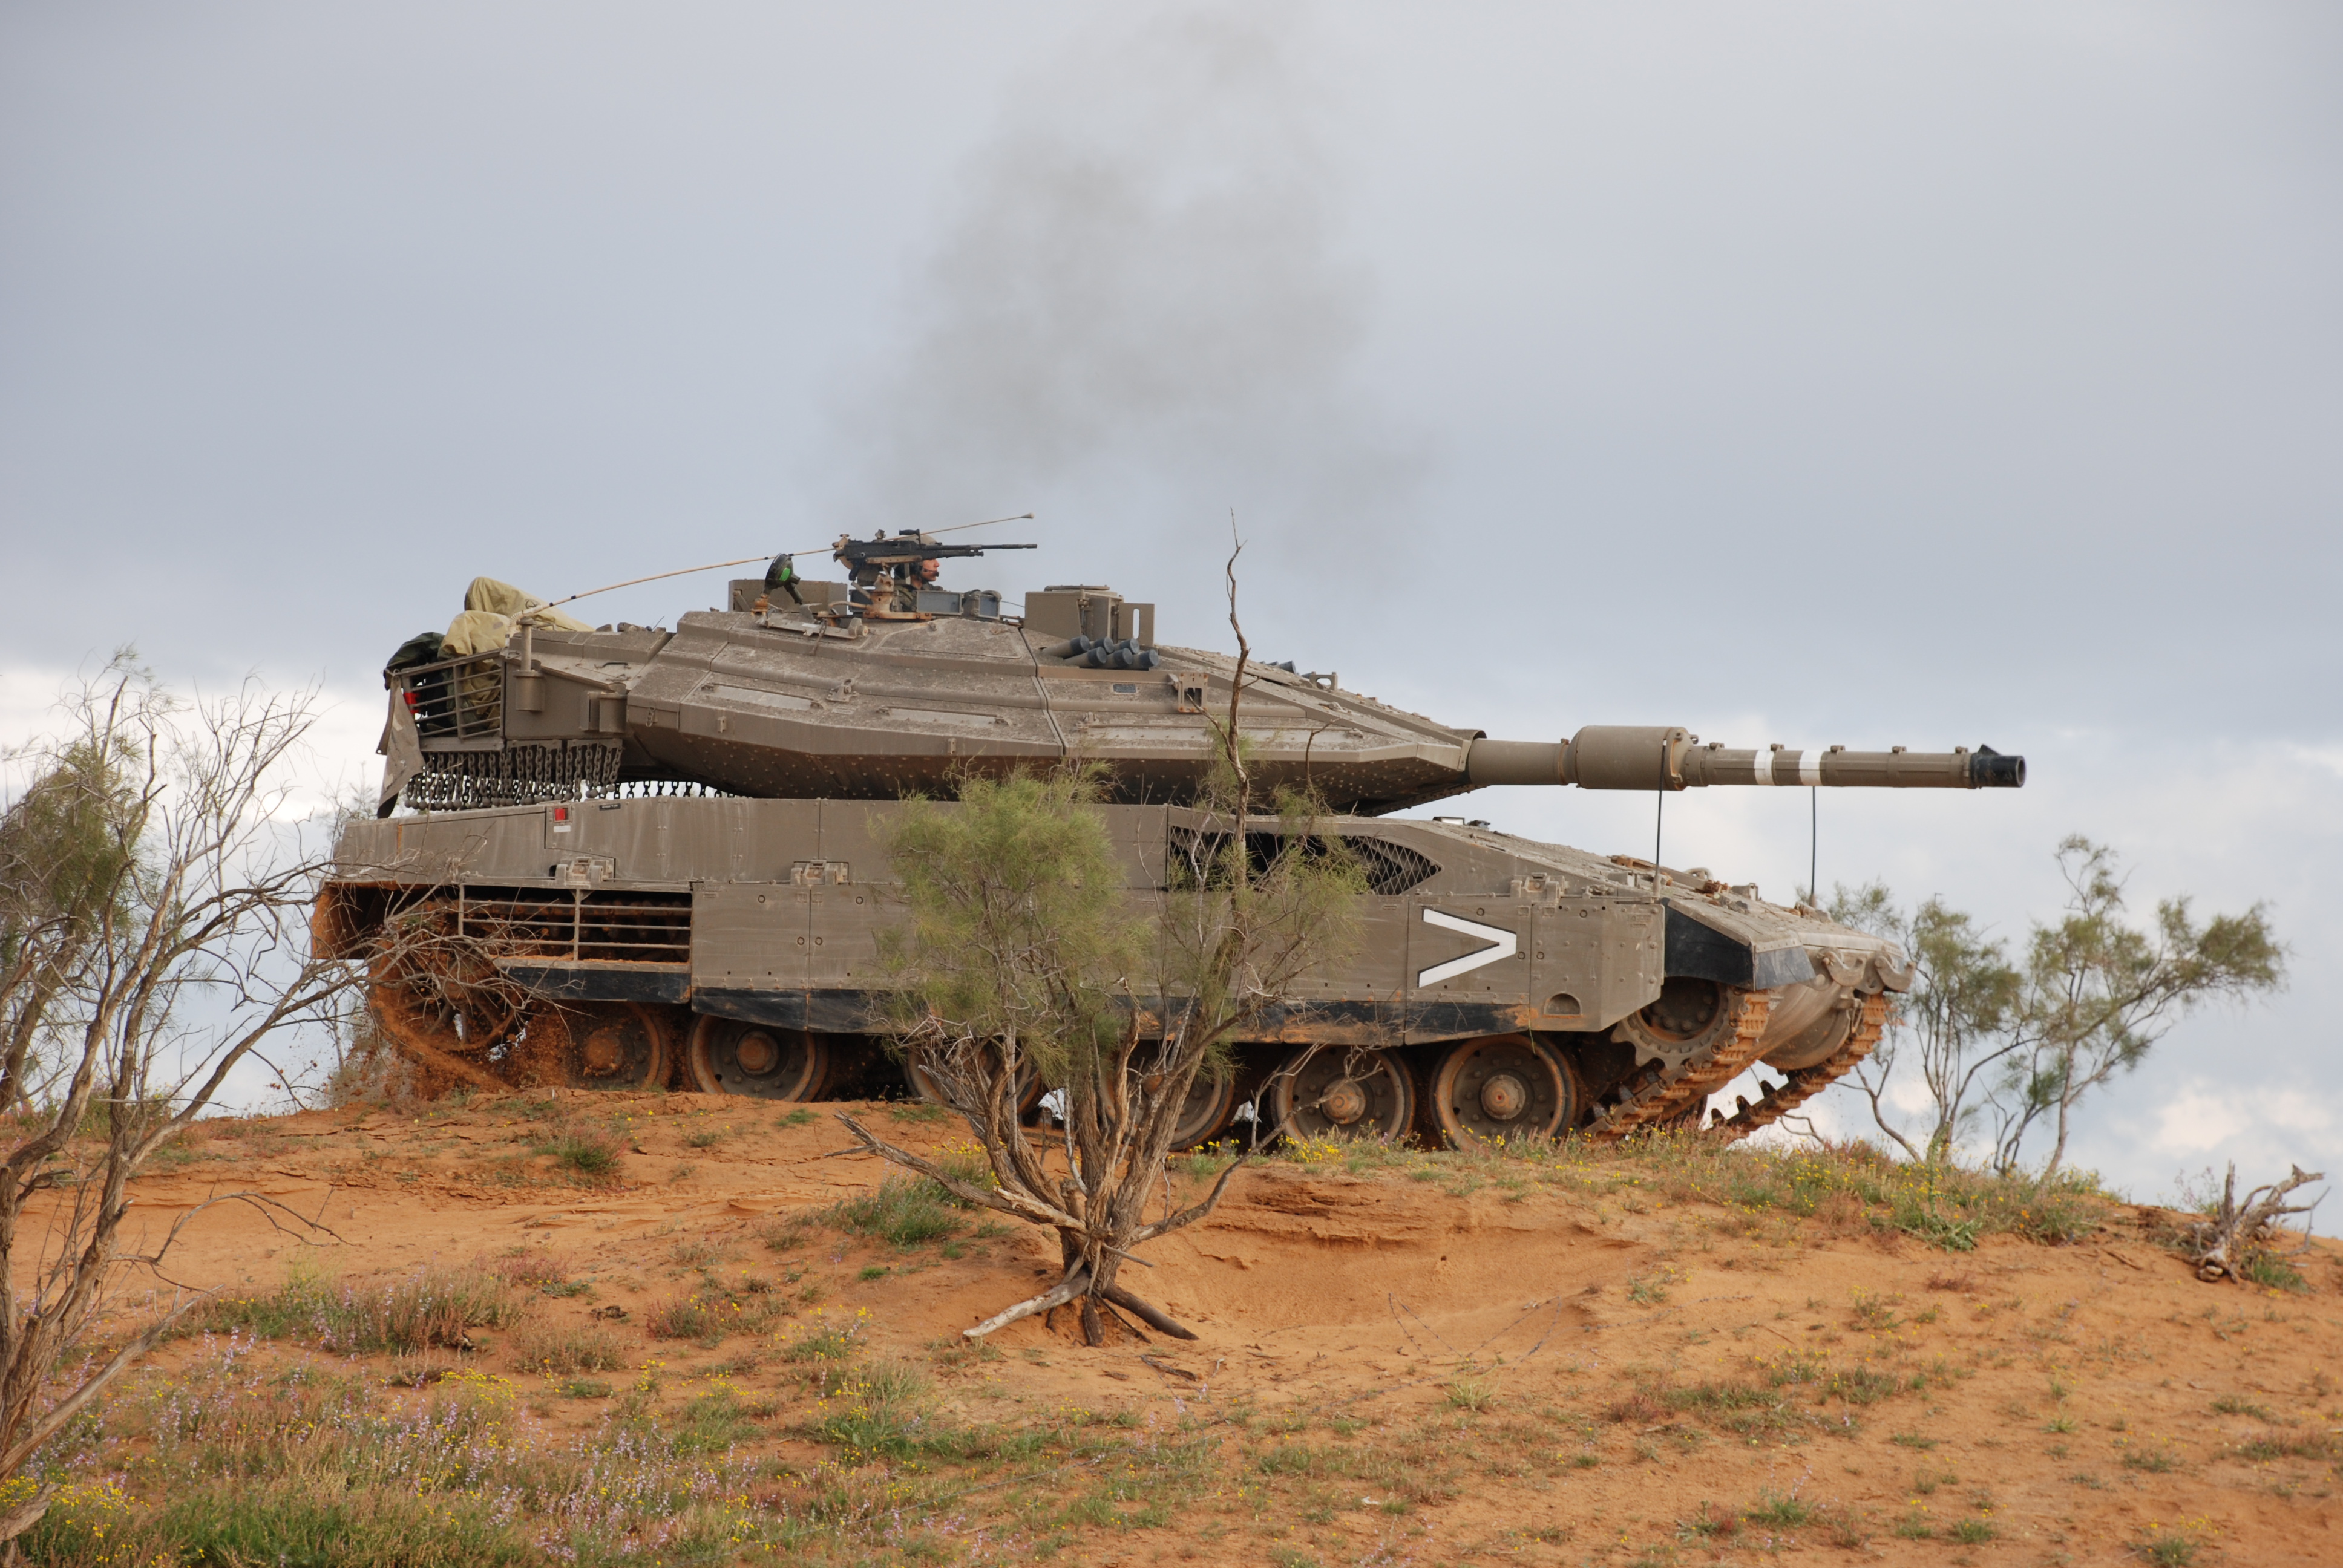 A powerful military tank, named Merkava, in action.